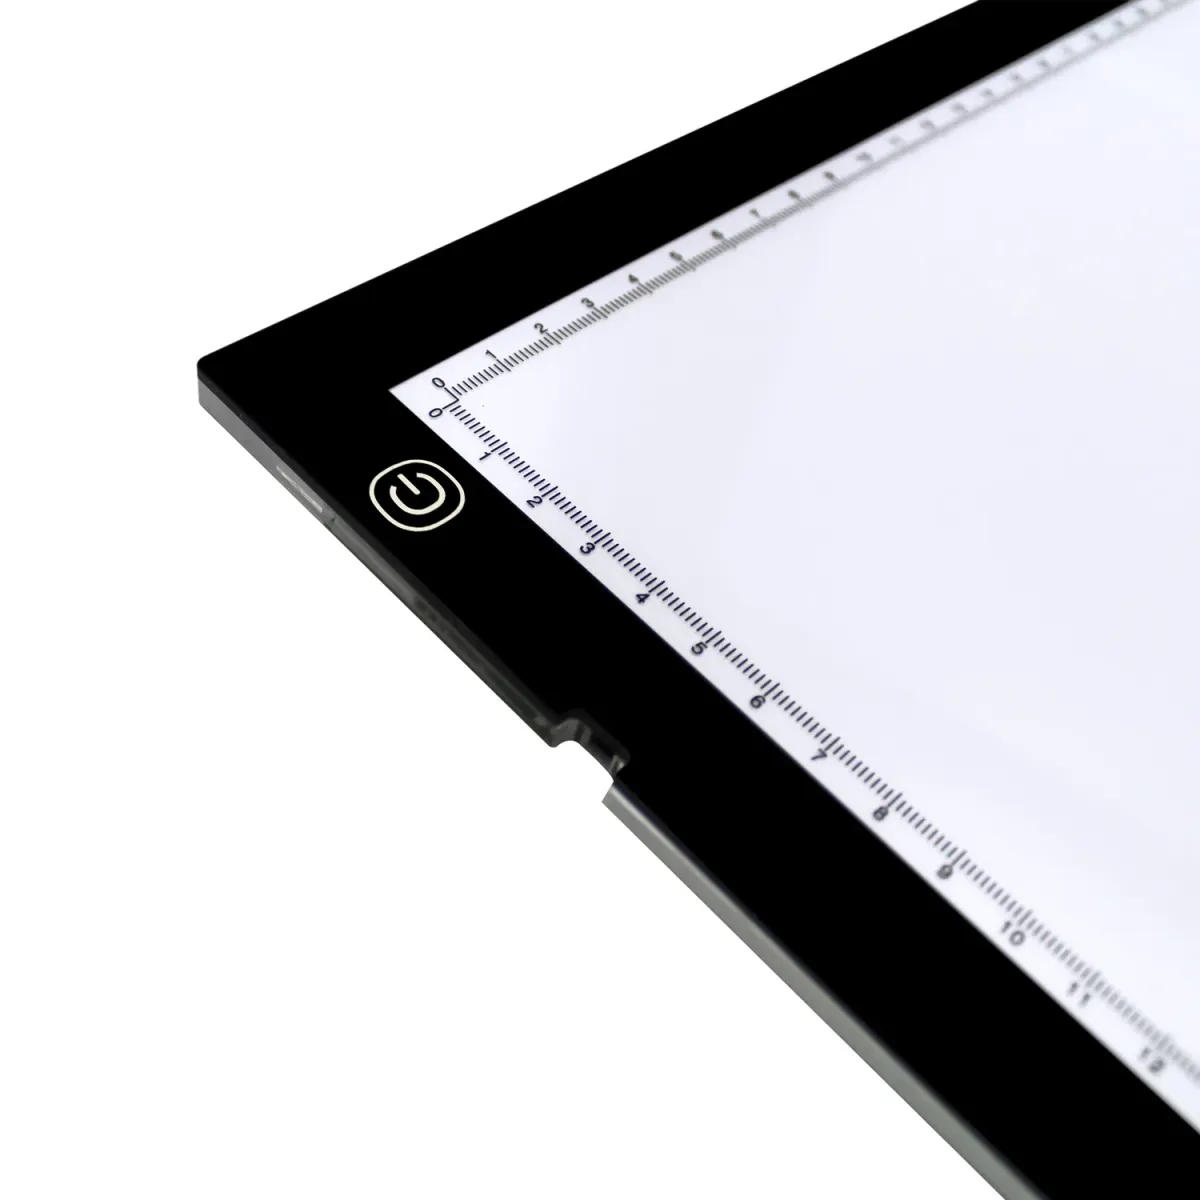 Huion A3 LED Light Board | Huion Official Drawing Tablets, Pen Tablets, Pen Display, Led Light Pad